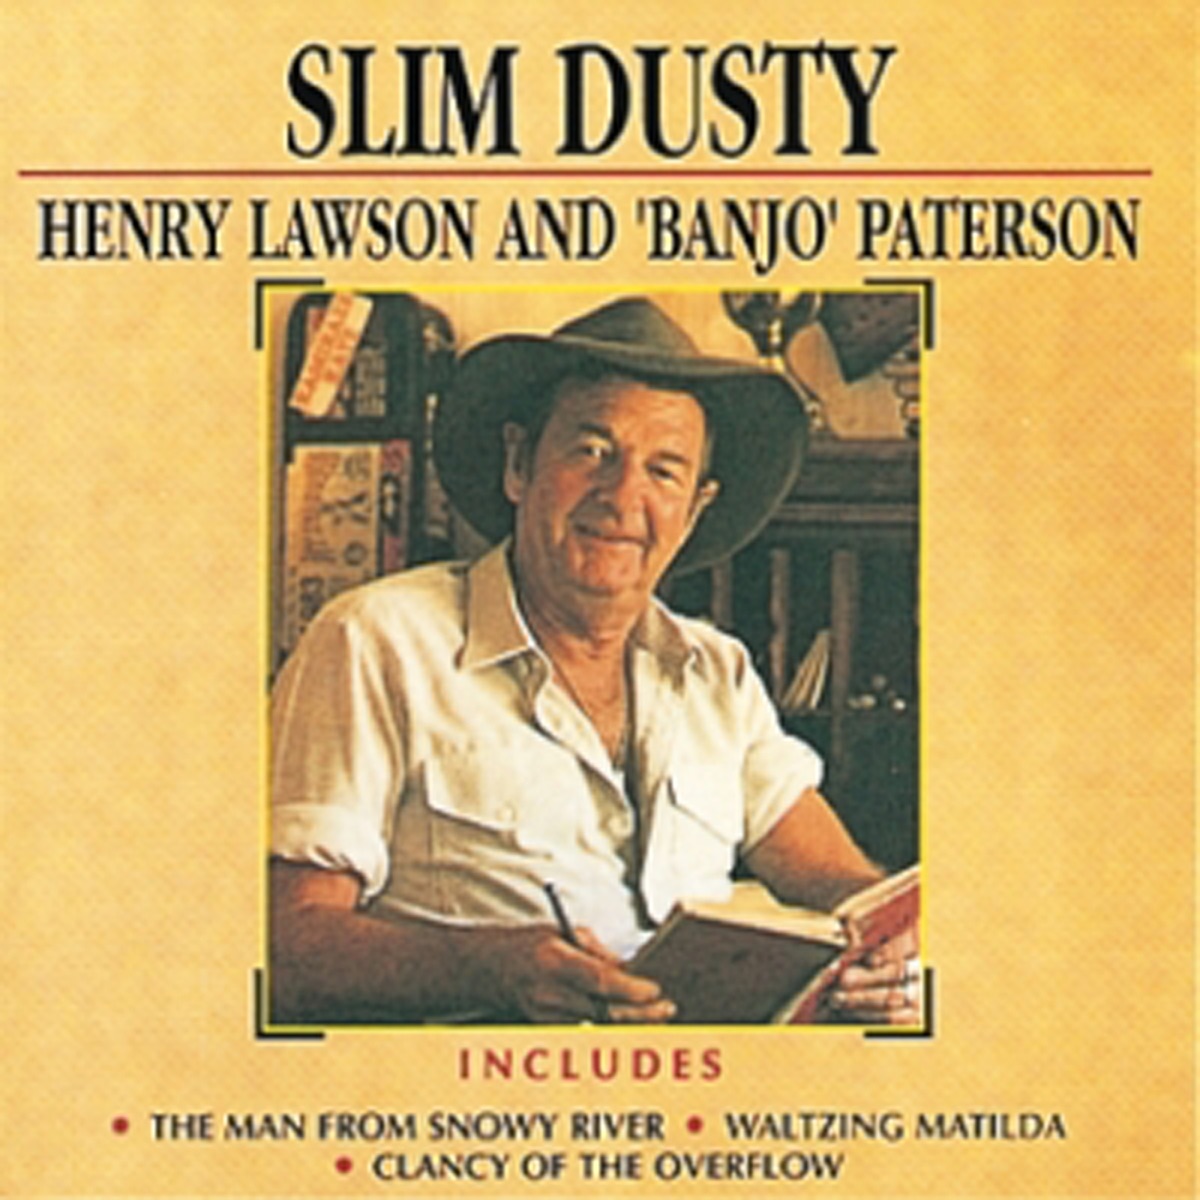 ‎Henry Lawson and 'Banjo' Paterson (Remastered) by Slim Dusty on Apple Music